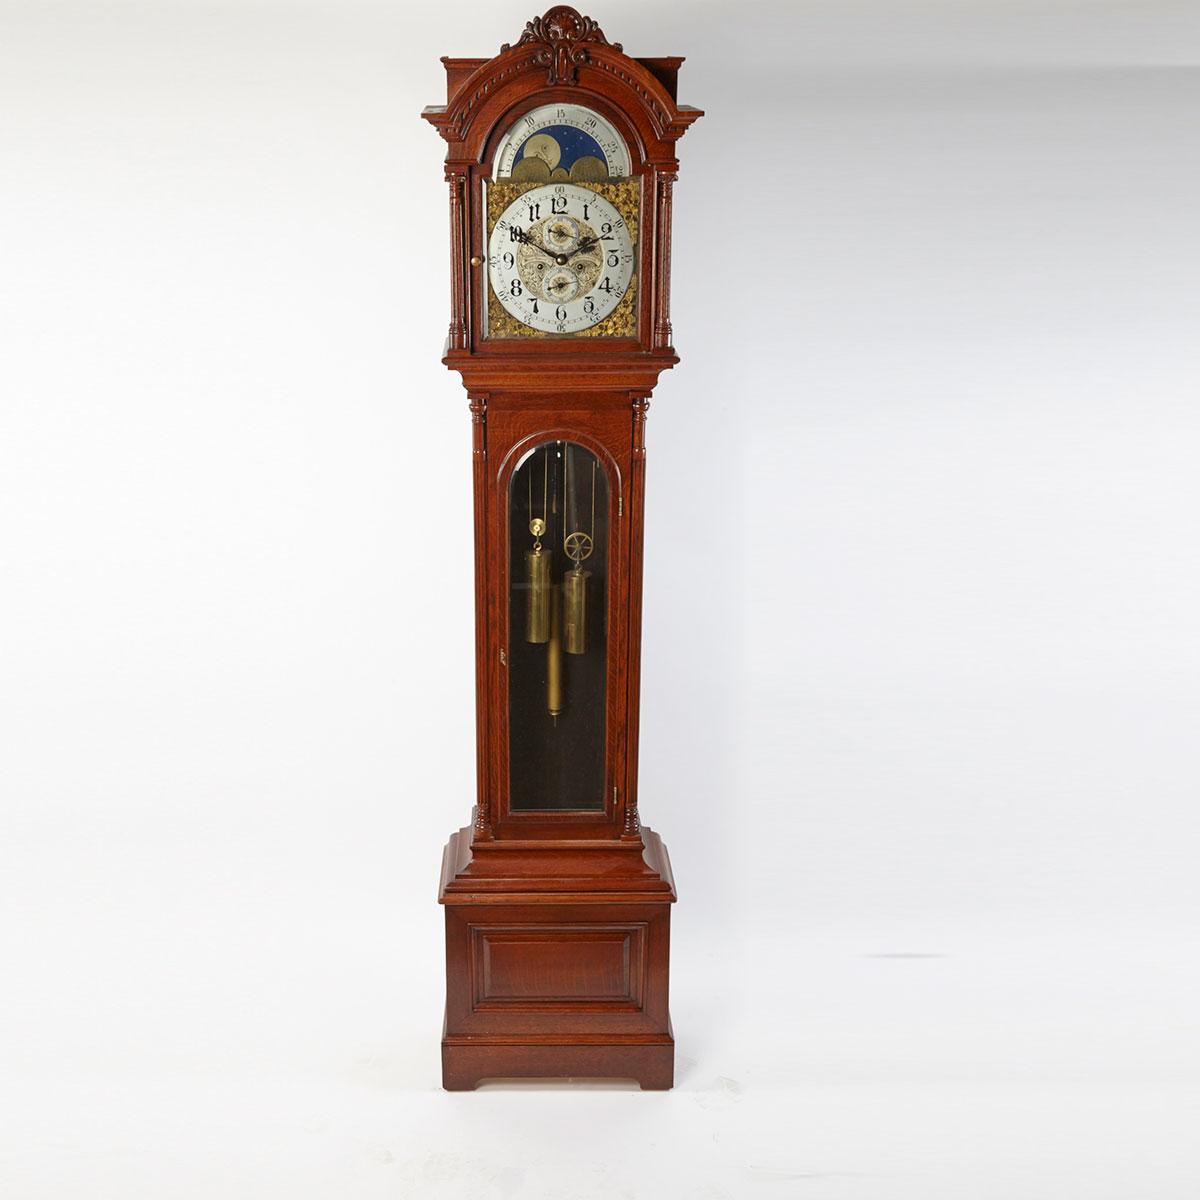 Canadian Oak Tall Case Clock, Henry Birks and Co., Montreal, c.1870